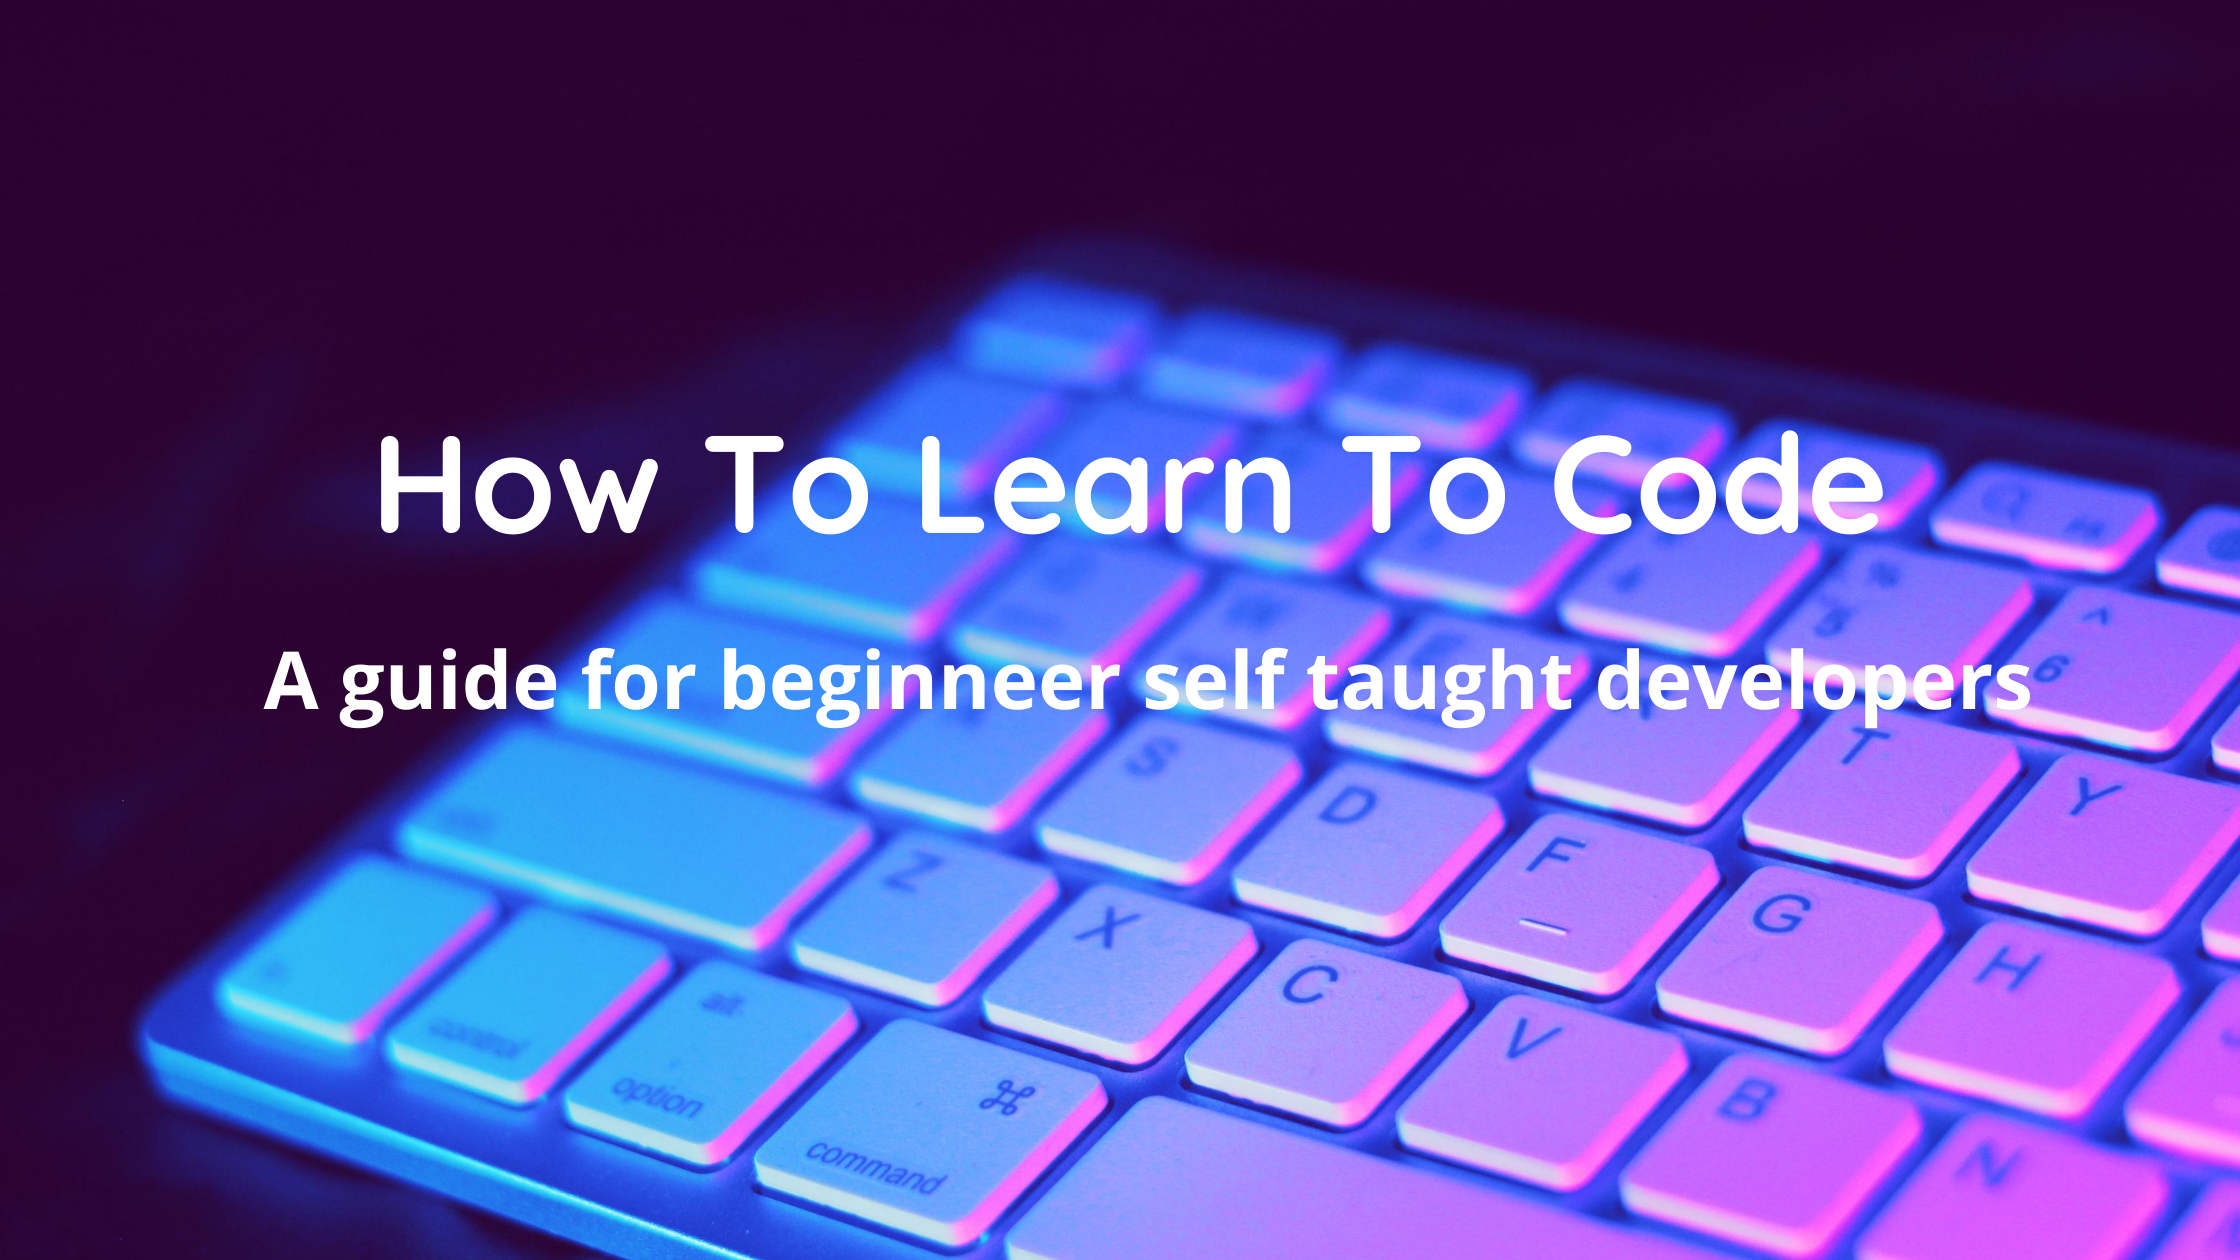 The Self-Taught Developer's Guide to Learning How to Code